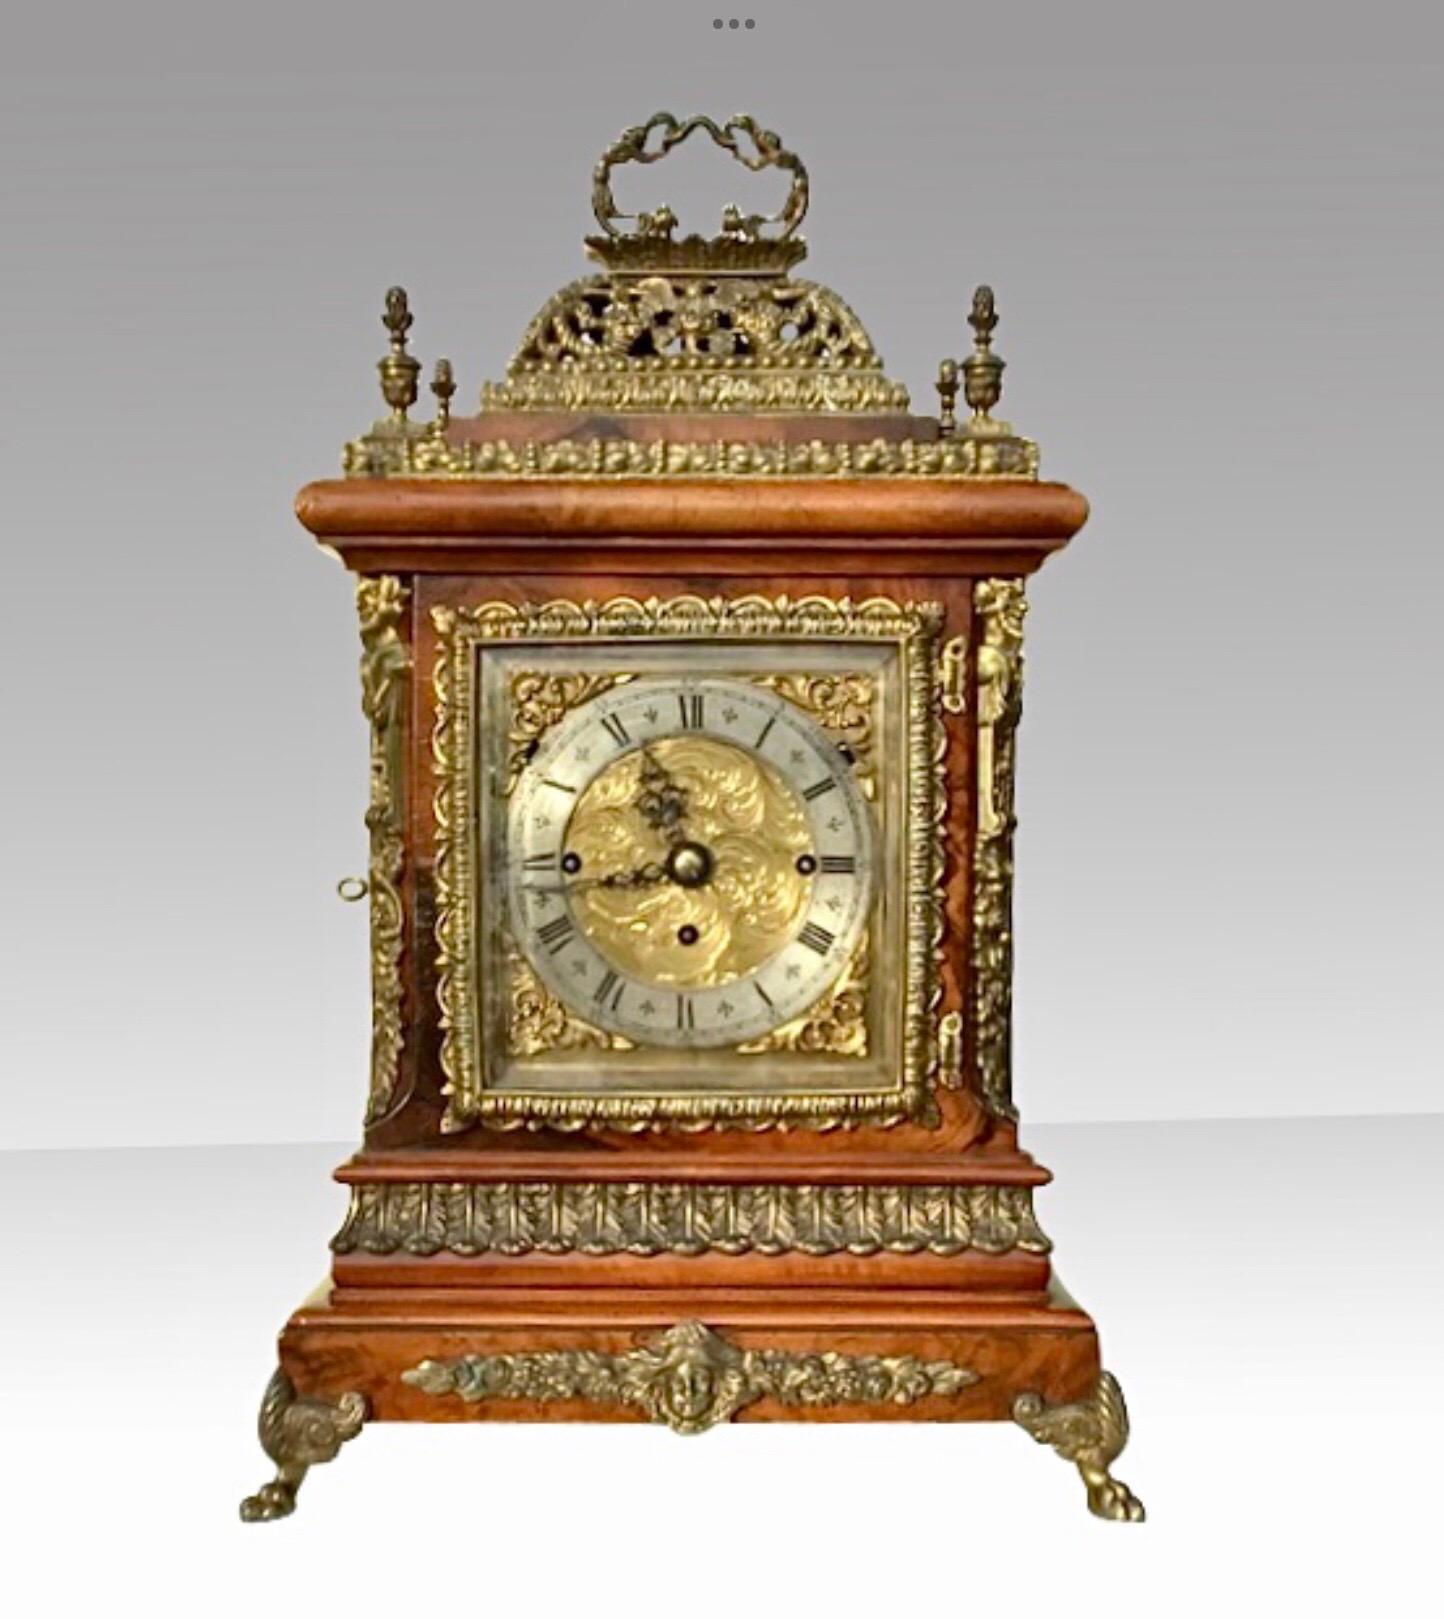 Magnificent English large basket top figured walnut triple fusee bracket boardroom musical clock,.
Decorated with brass filigree mounts that chimes the quarters and hours on a choice of 8 or 4 graduated bells.
(Also has chime silent